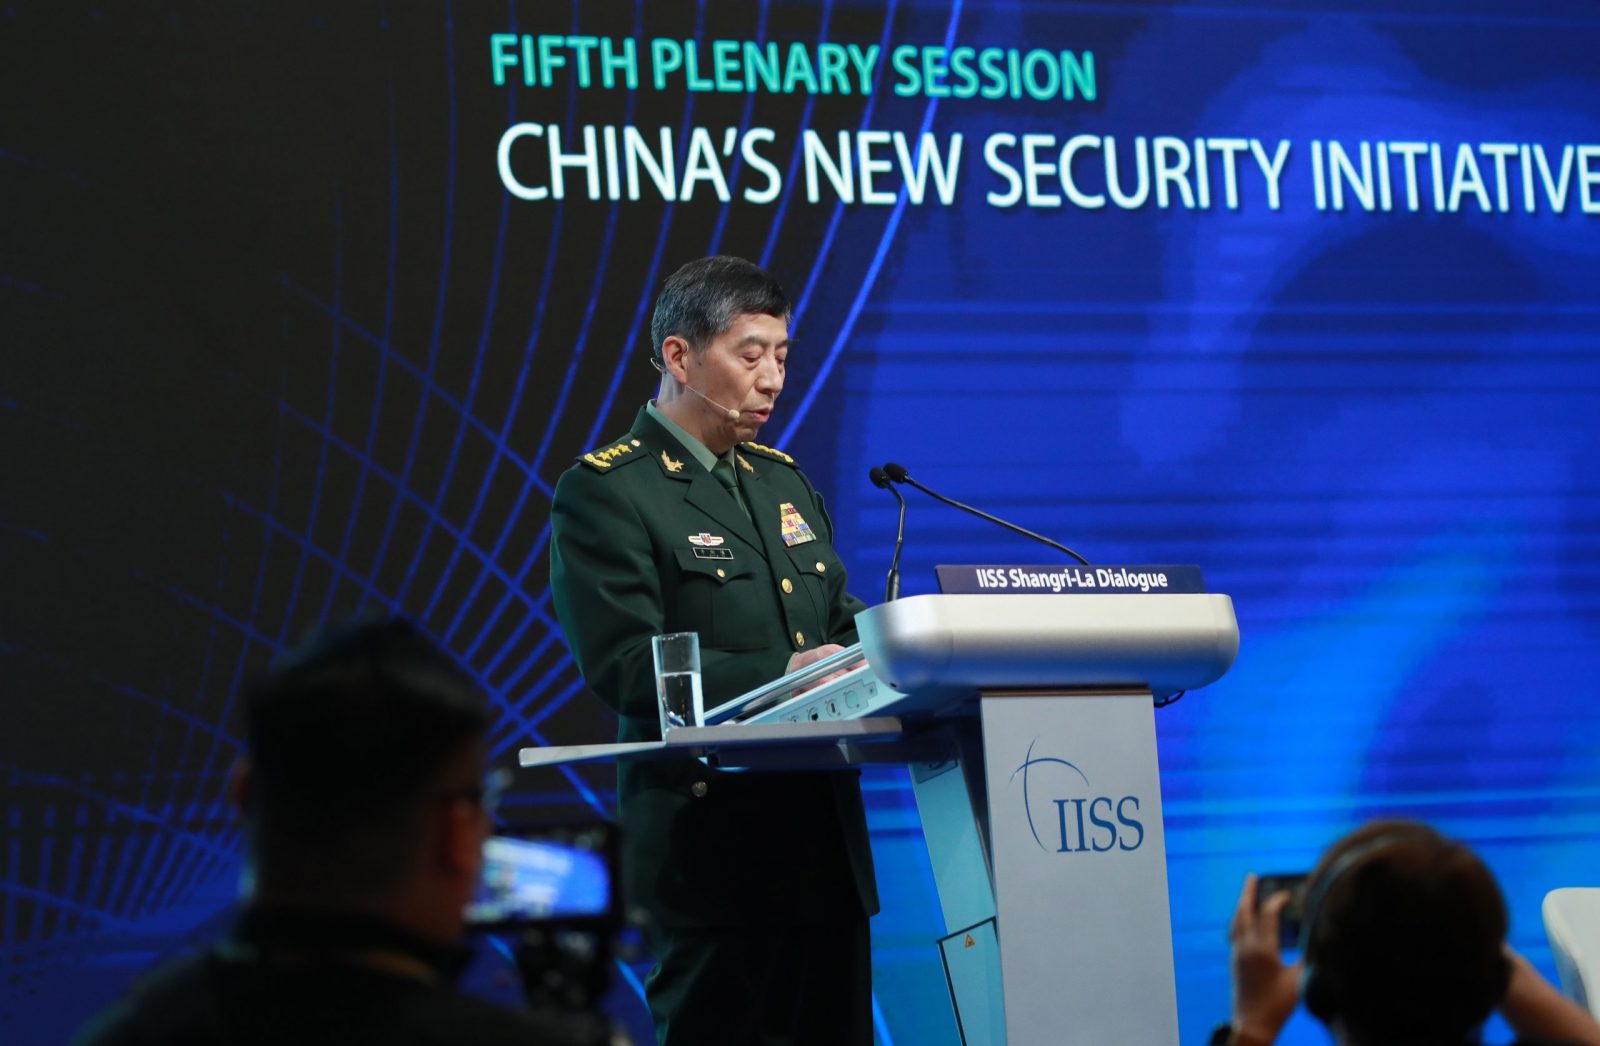 epa10671809 Chinese State Councilor and Minister of National Defence General Li Shangfu delivers his speech during a plenary session of the International Institute for Strategic Studies (IISS) Shangri-la Dialogue at the Shangri-la hotel in Singapore, 04 June 2023. Defense ministers and officials from 41 countries are gathered in the city state for the IISS Shangri-la Dialogue, an annual high level defence summit in the Asia Pacific region.  EPA/HOW HWEE YOUNG